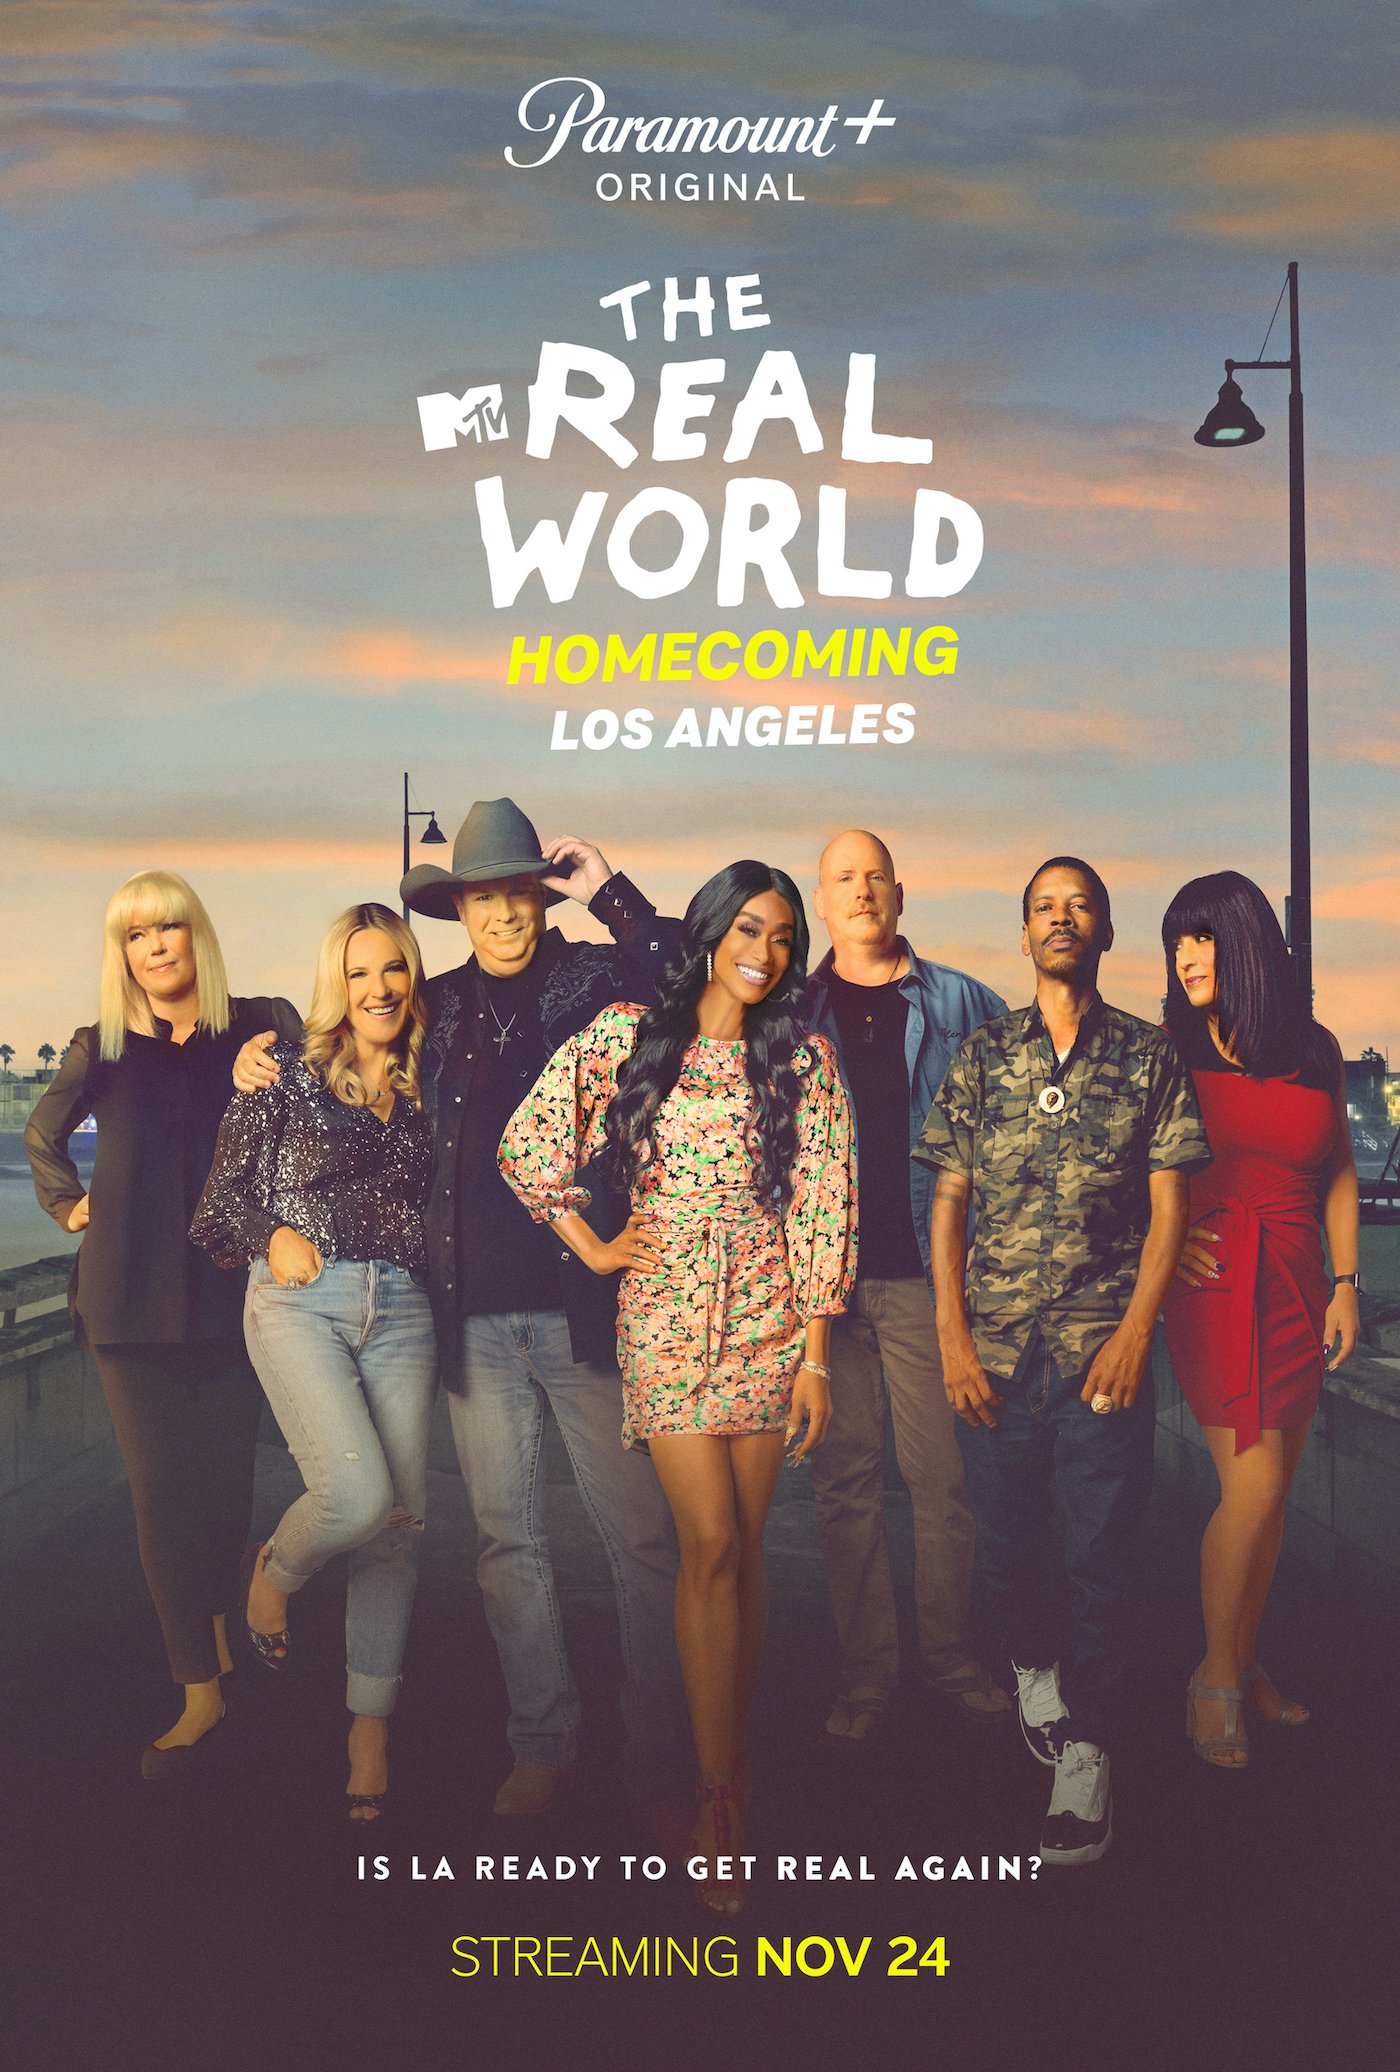 The Real World Homecoming: Los Angeles cast returns for a reunion